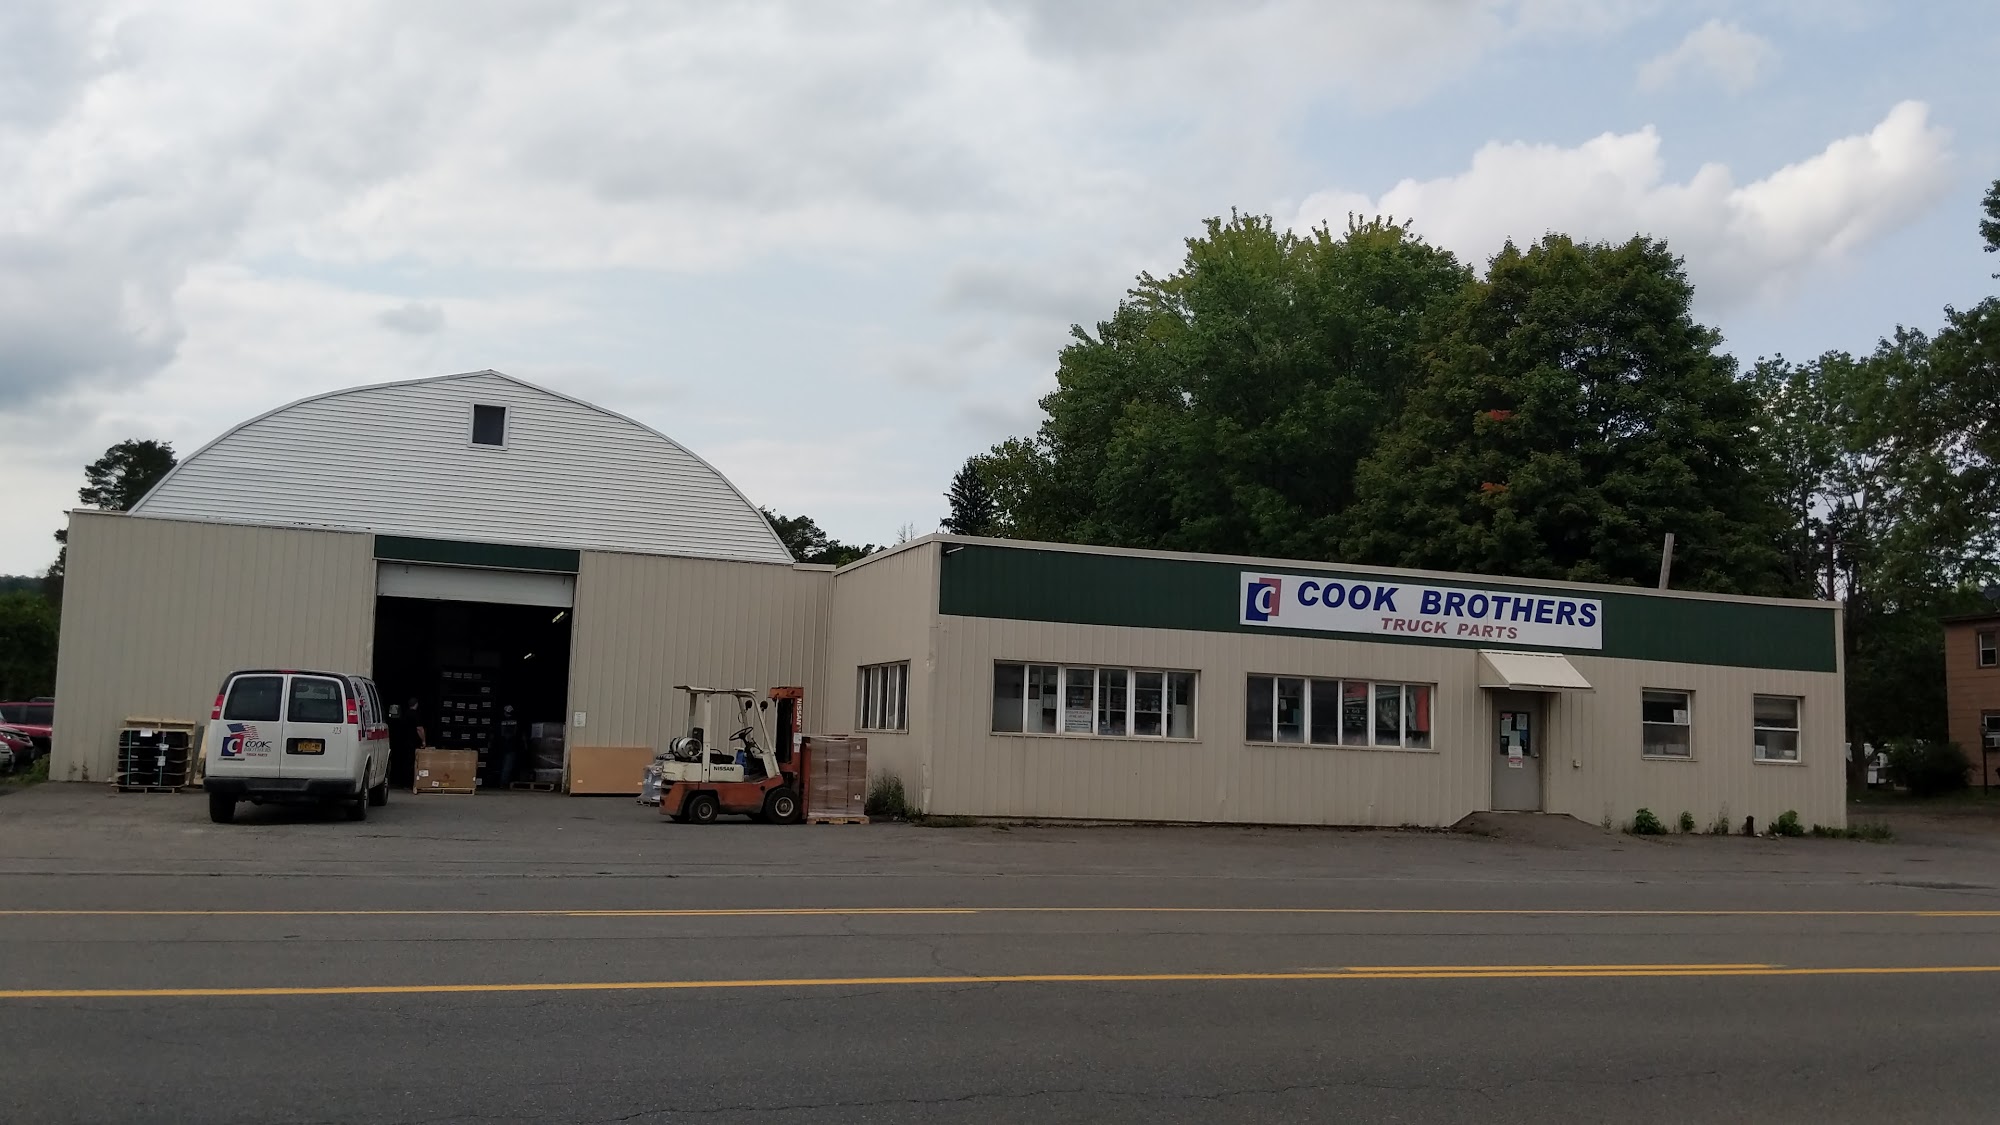 Cook Brothers Truck Parts Co